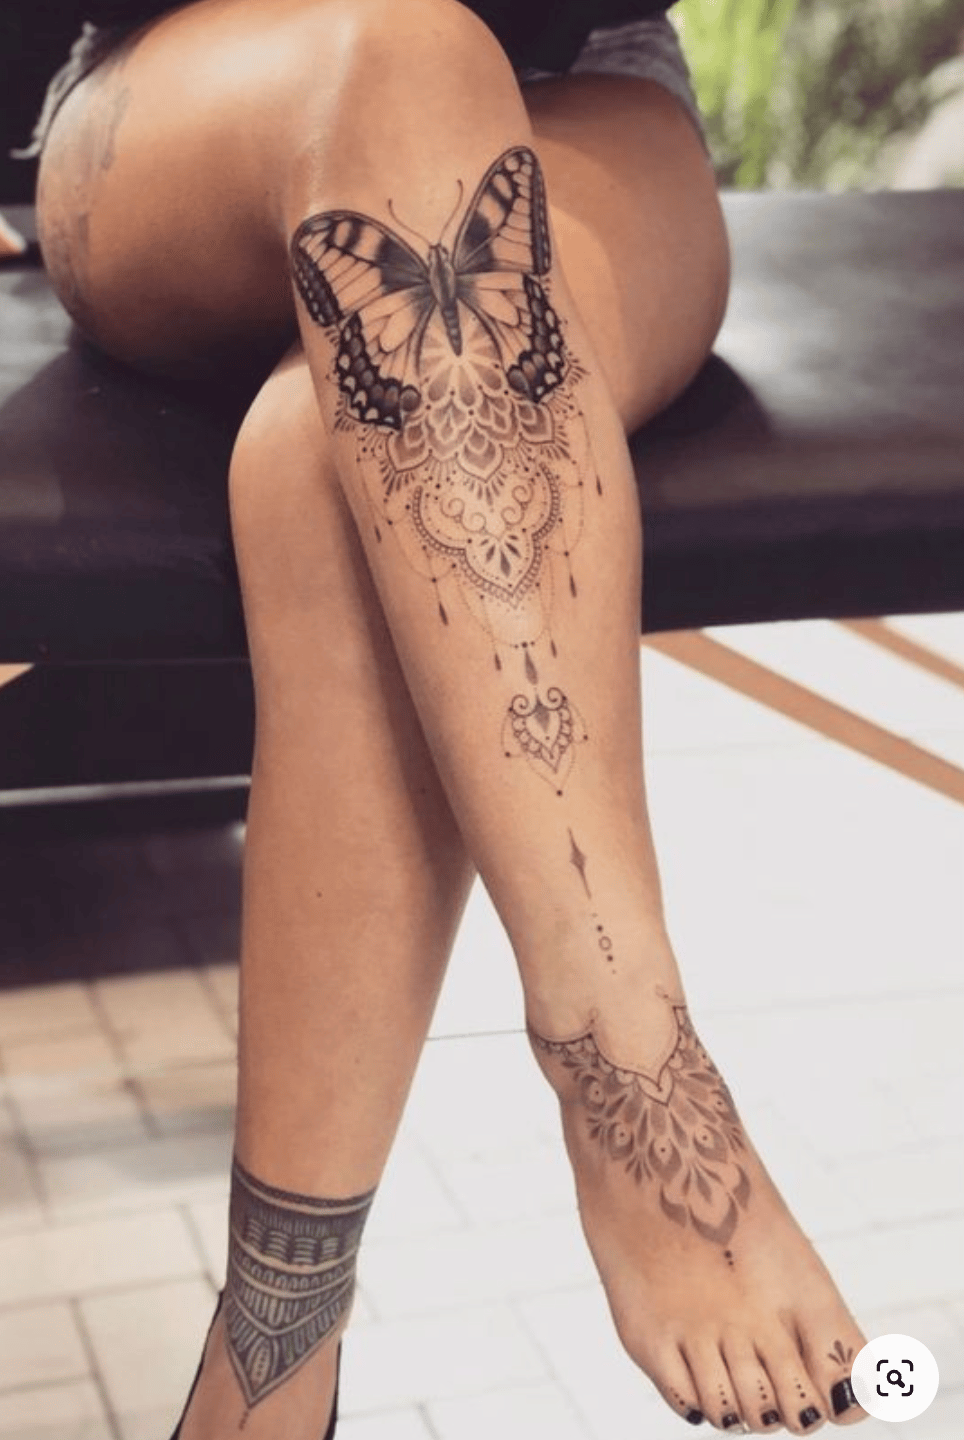 Female native American chief tattoo on the left calf